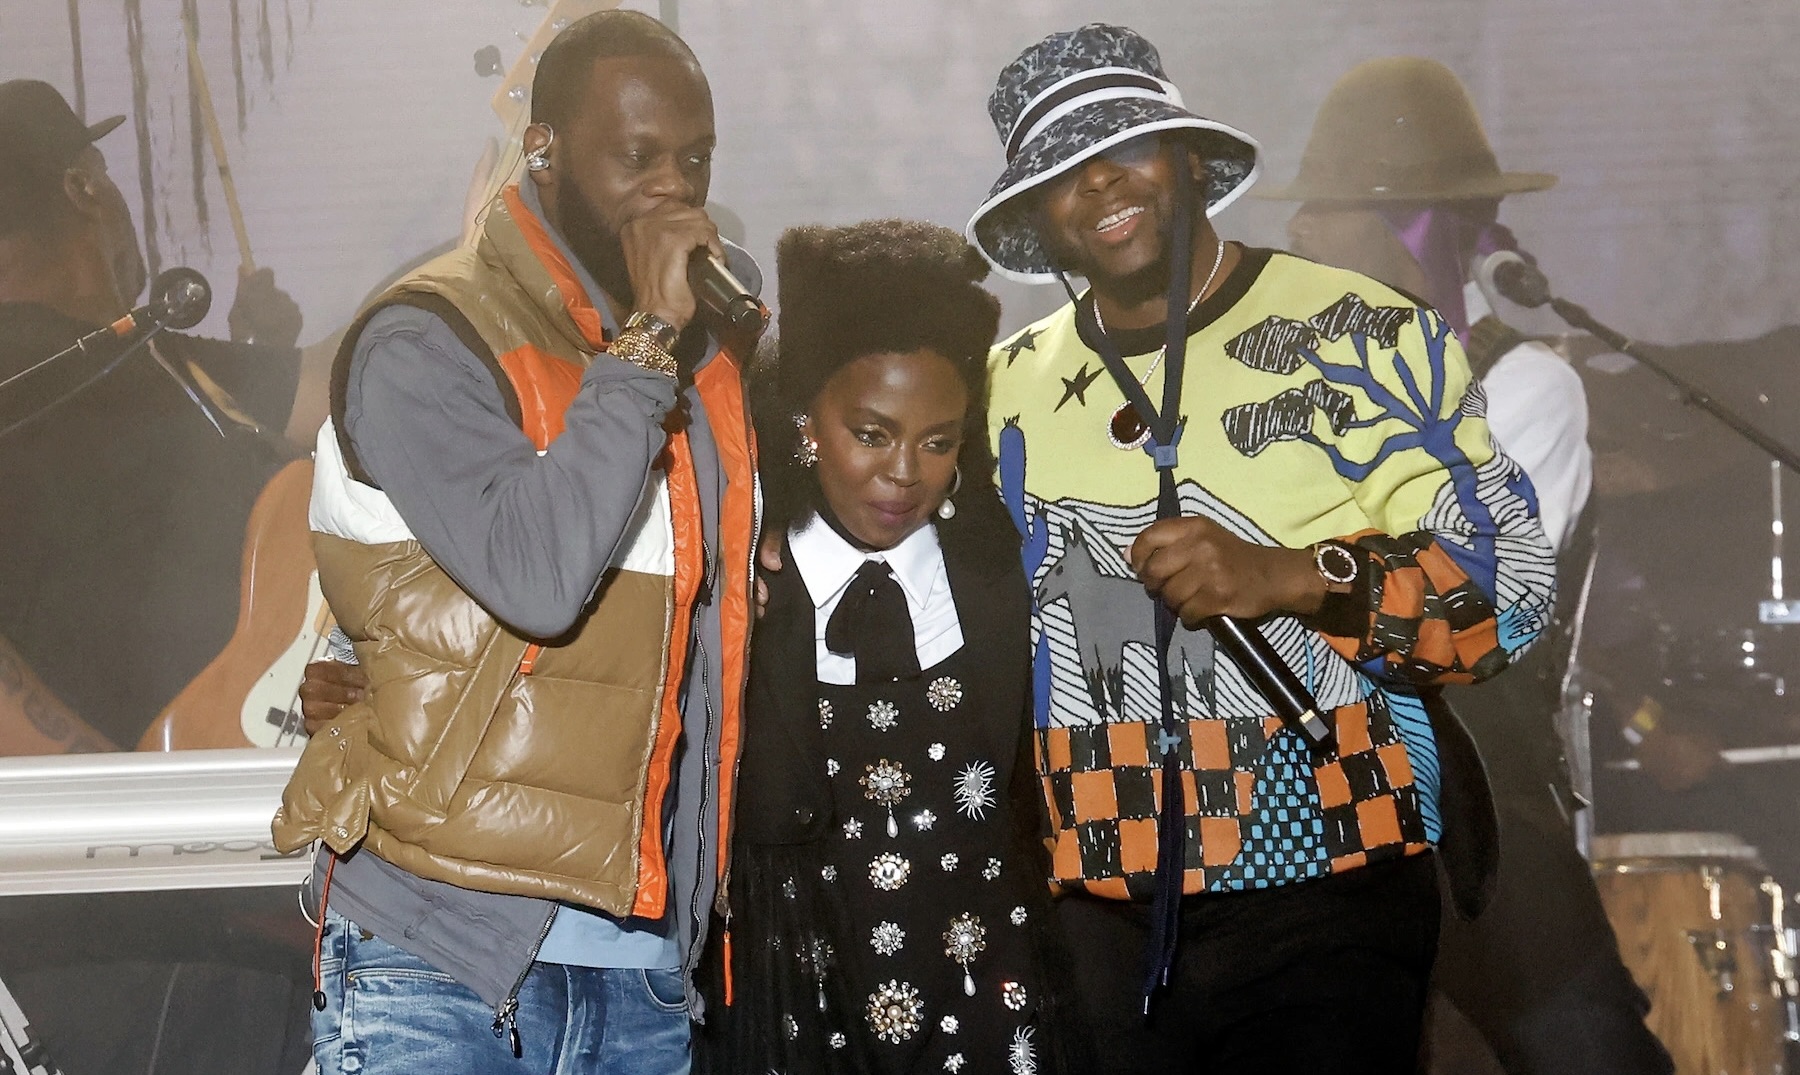 The Fugees Had An On-Stage Reunion At Roots Picnic And It Could Be Their Final One Ever Given The Pras Situation [Video]